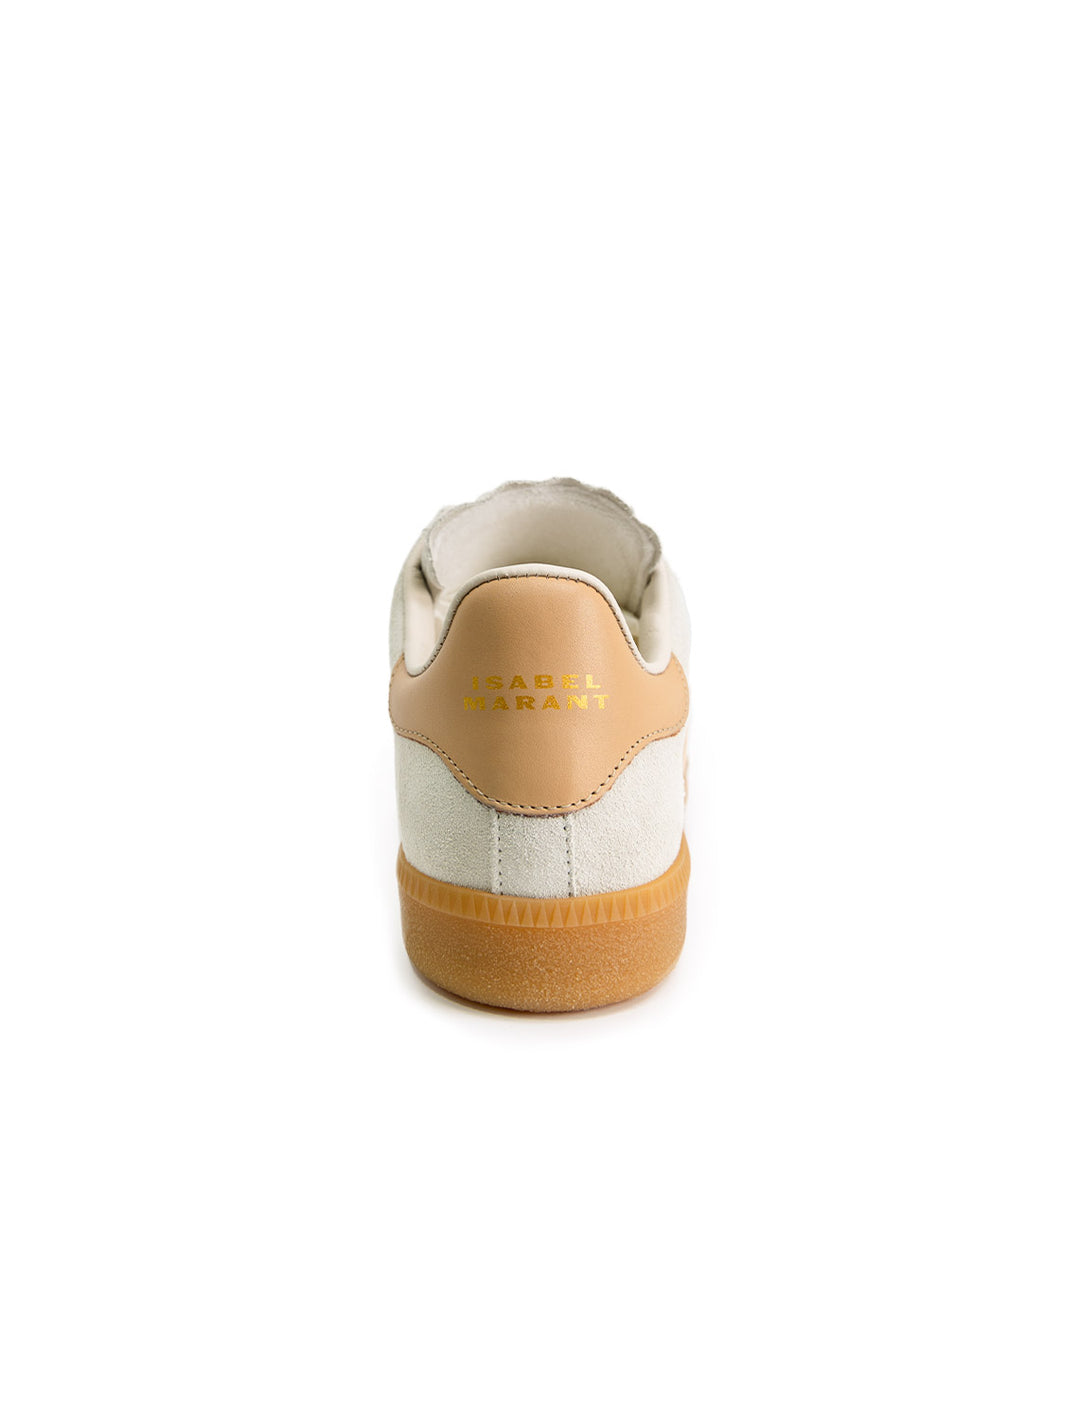 Back view of Isabel Marant Etoile's Beth Sneaker in Chalk and Beige.